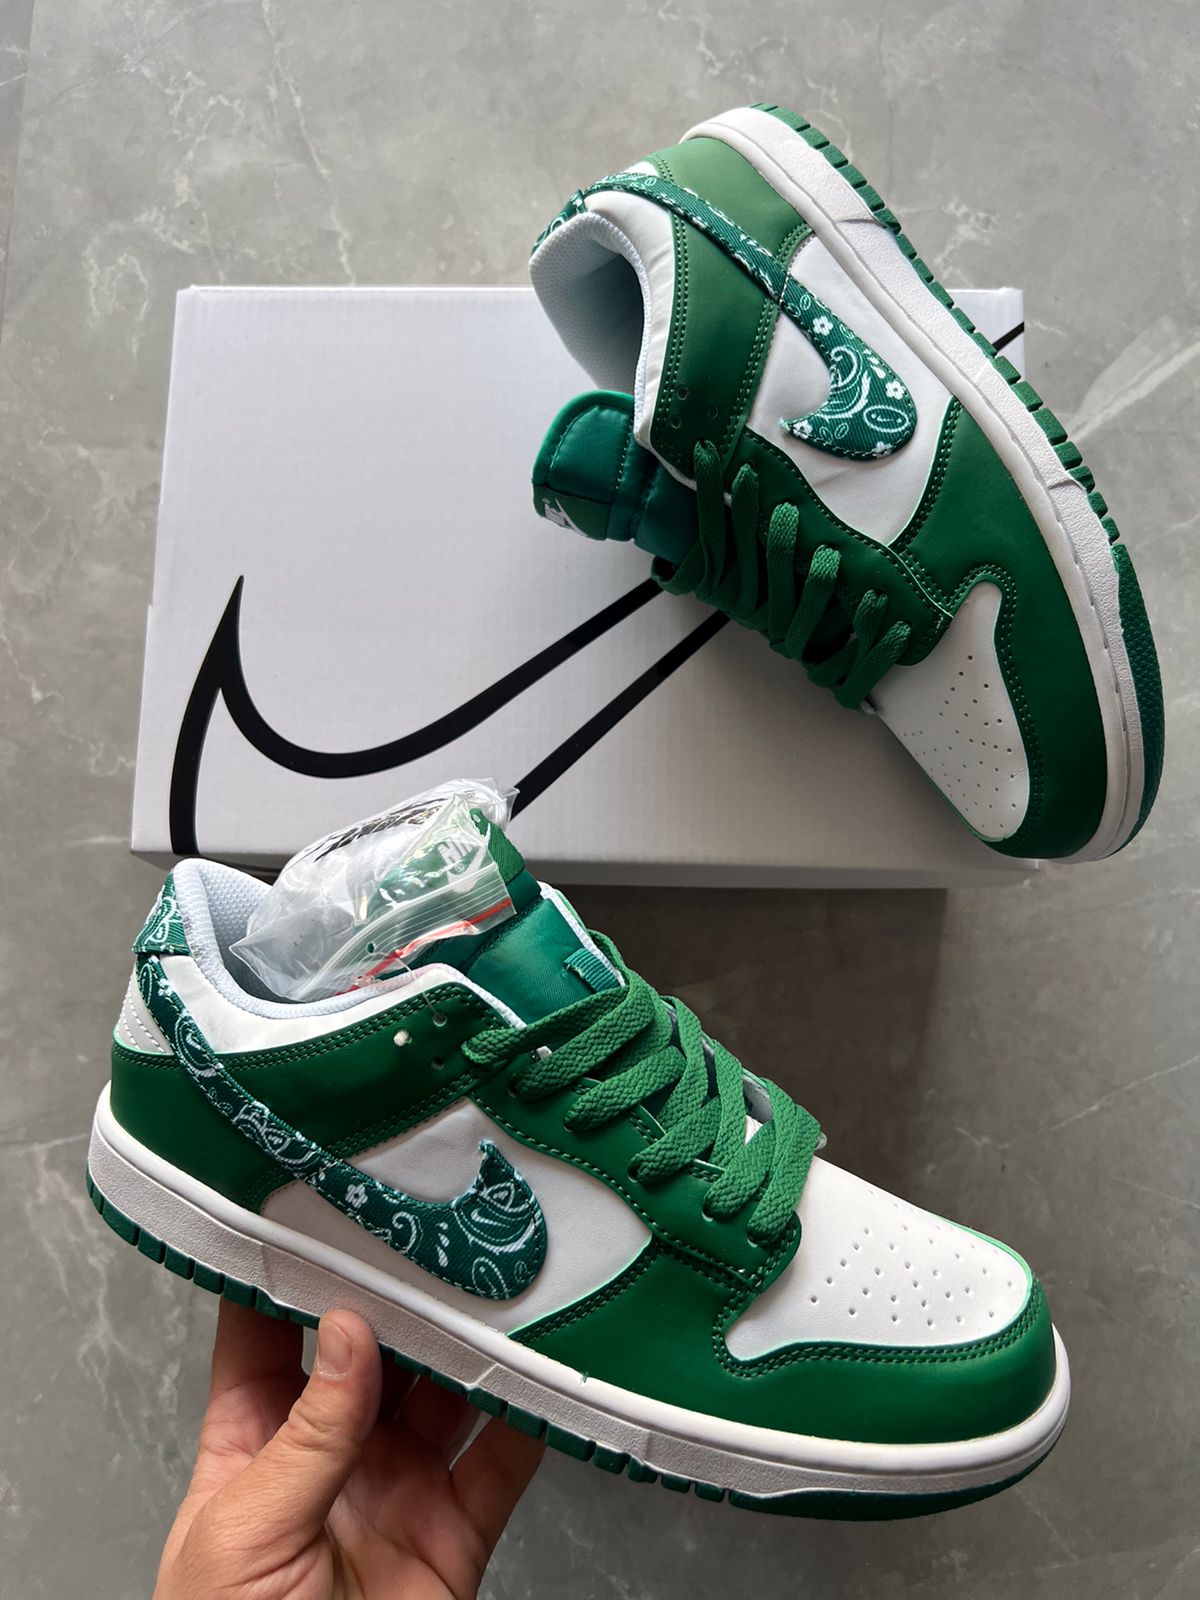 SB Dunk Paisley Sneakers Green Color